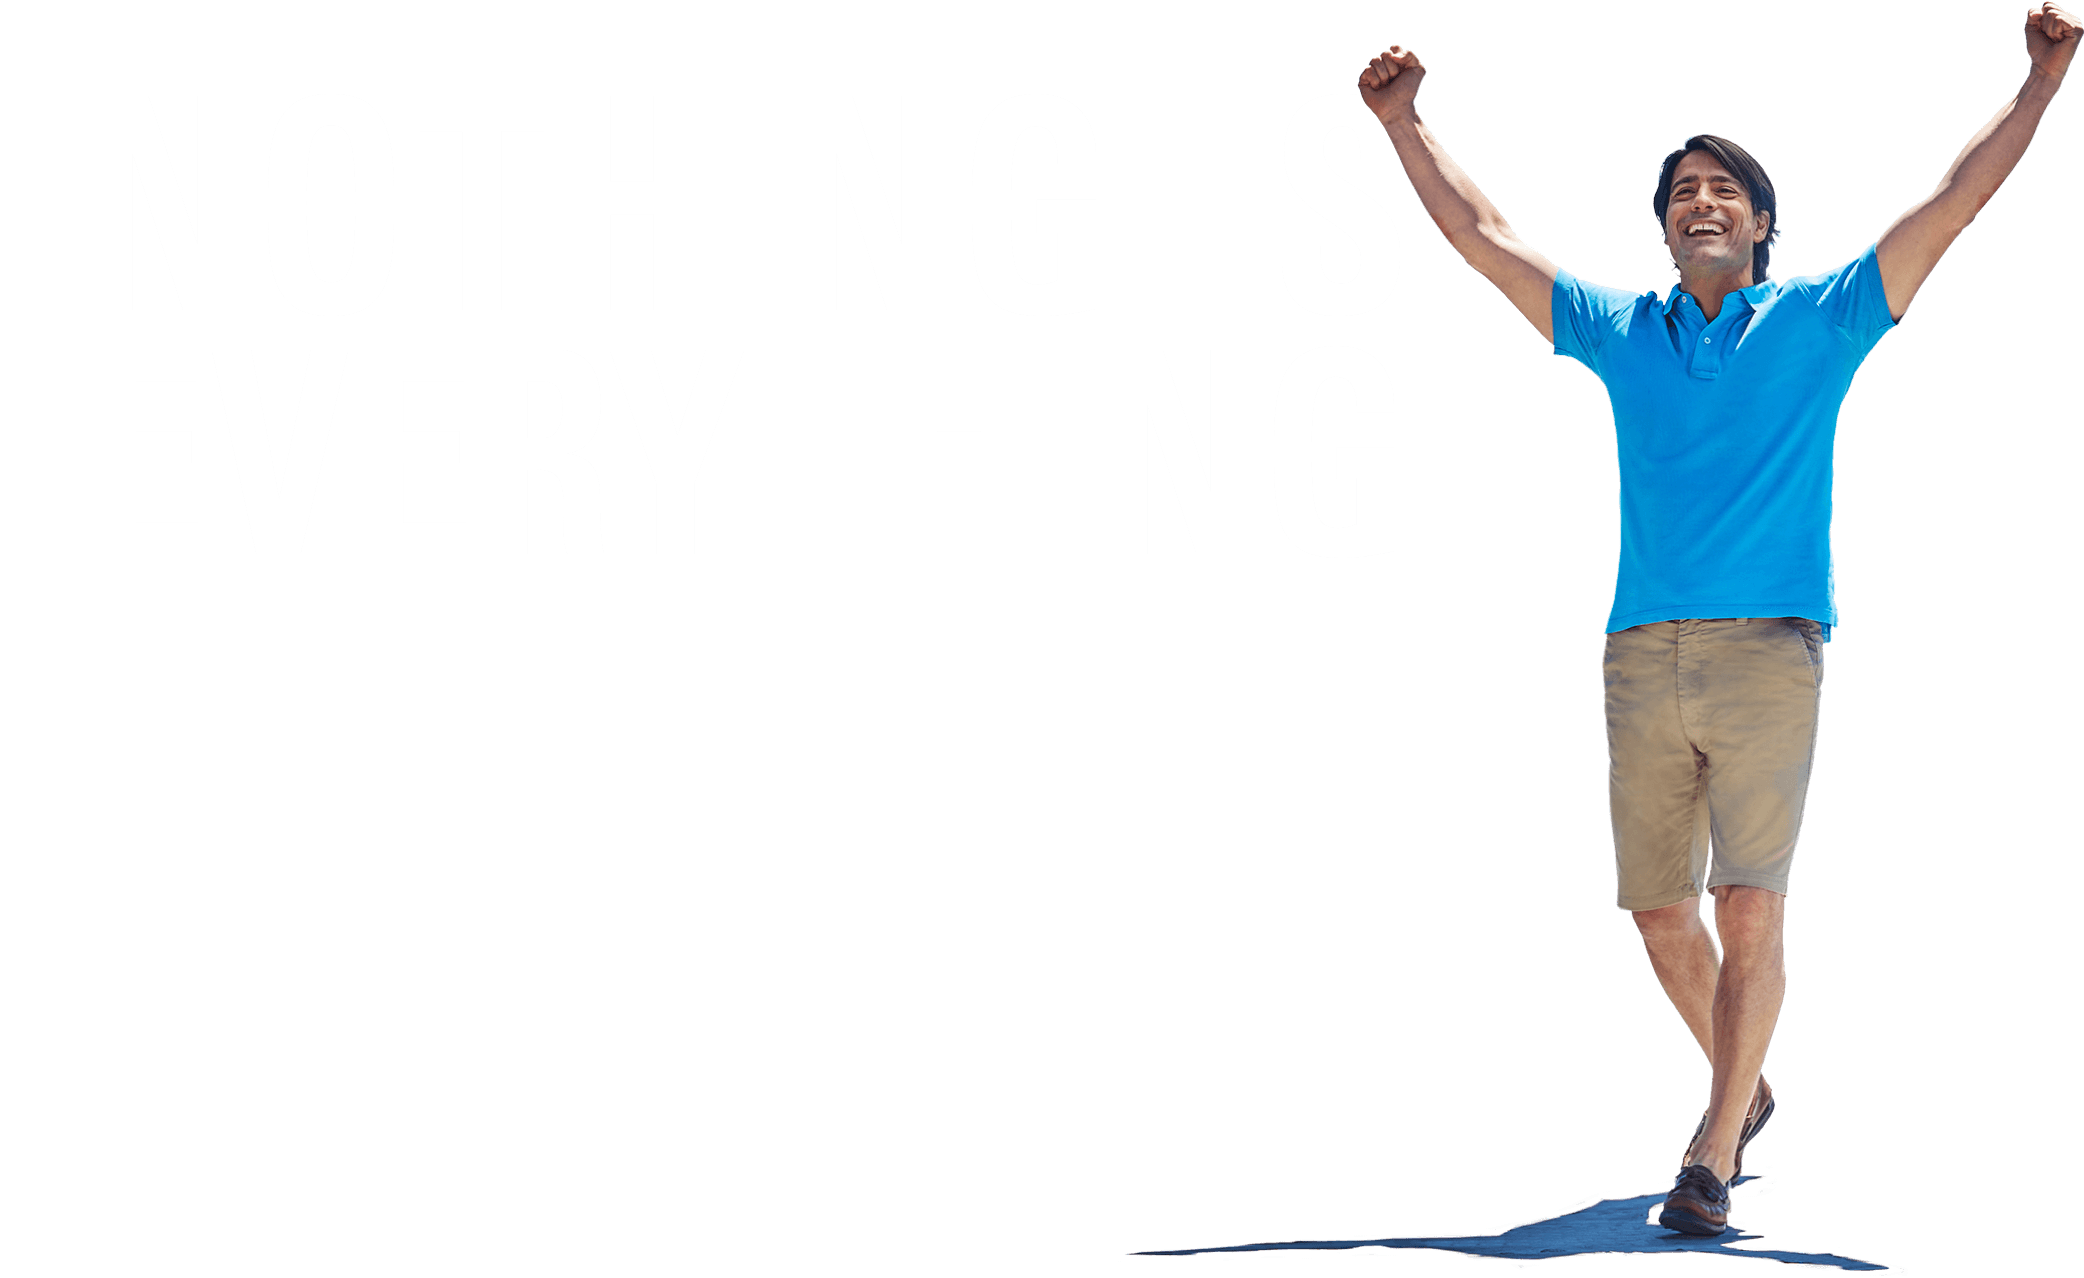 NOTHING IS EVERYTHING.